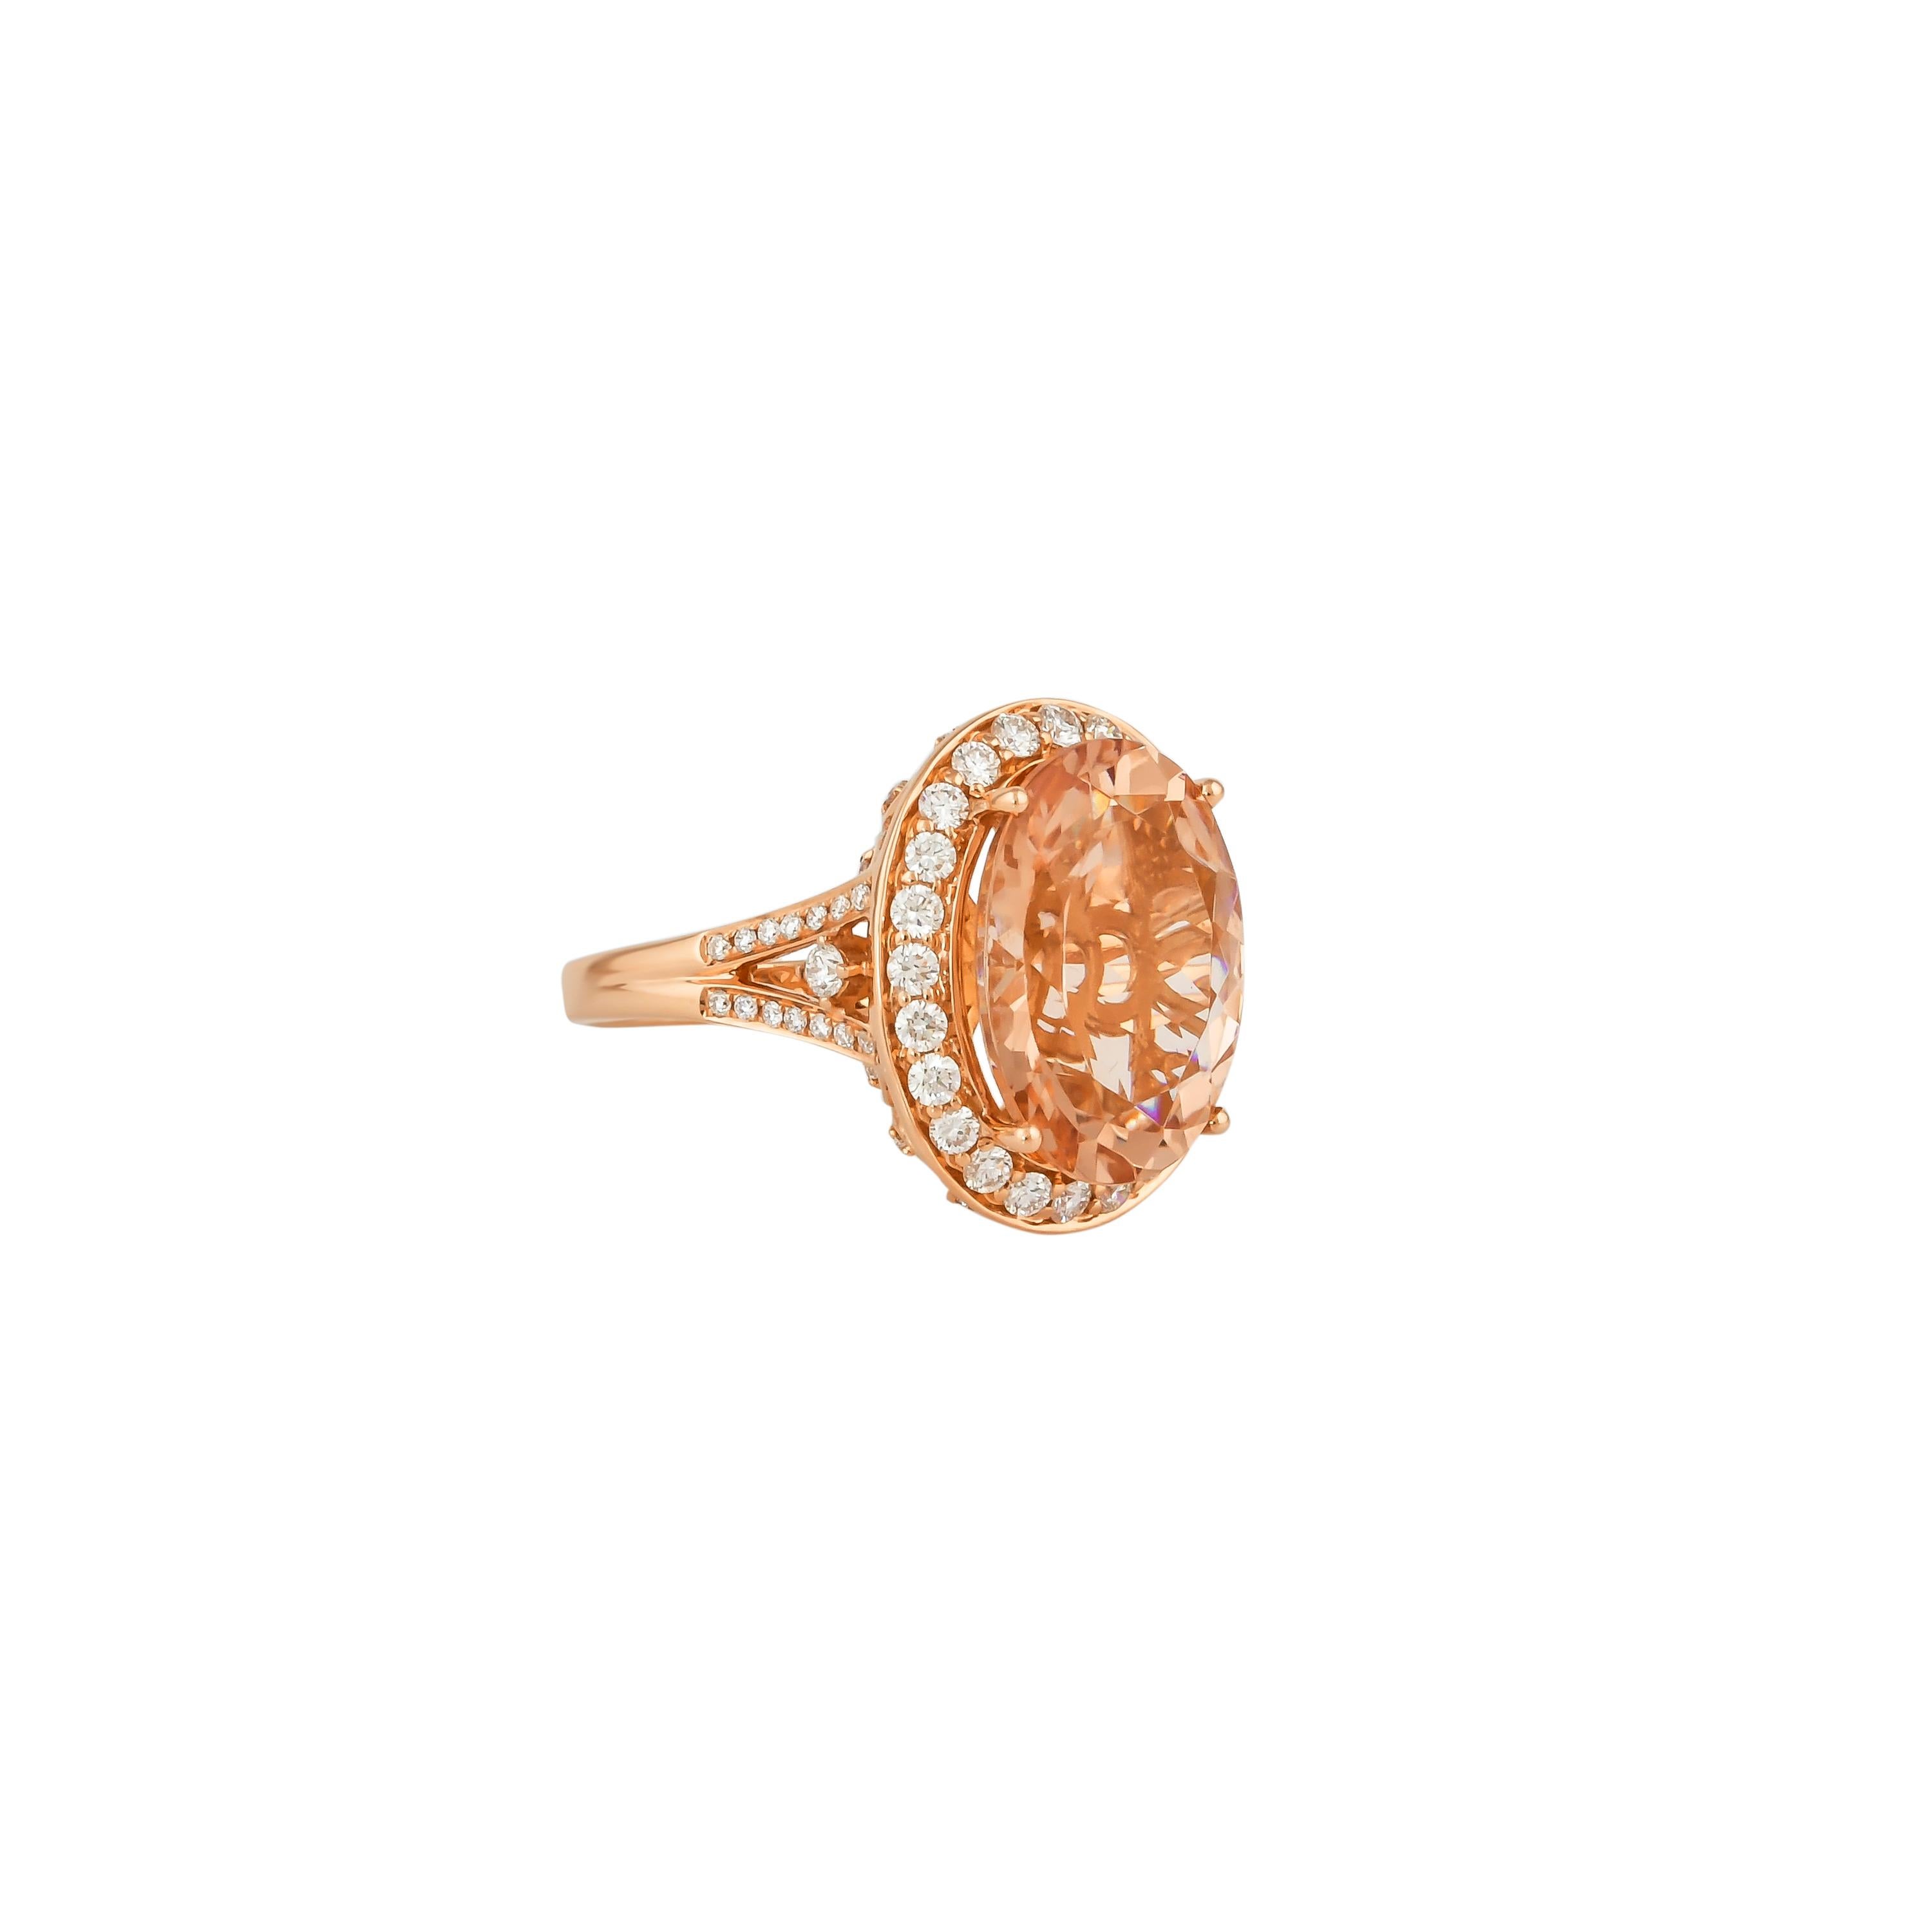 This collection features an array of magnificent morganites! Accented with diamonds these rings are made in rose gold and present a classic yet elegant look. 

Classic morganite ring in 18K rose gold with diamonds. 

Morganite: 8.06 carat oval